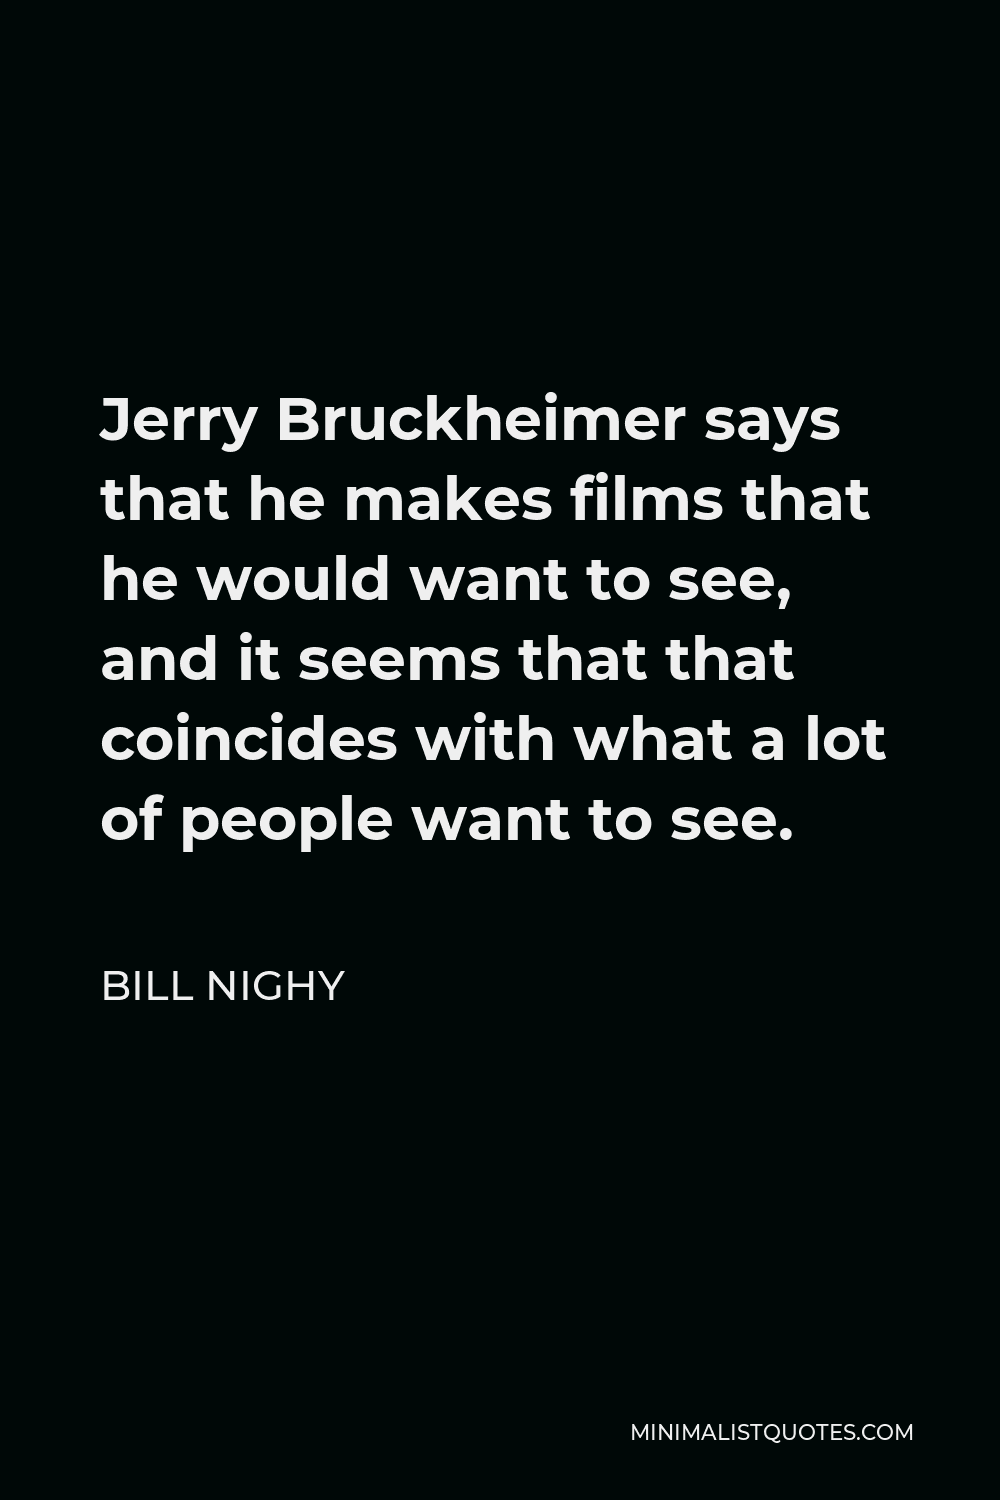 Bill Nighy Quote - Jerry Bruckheimer says that he makes films that he would want to see, and it seems that that coincides with what a lot of people want to see.